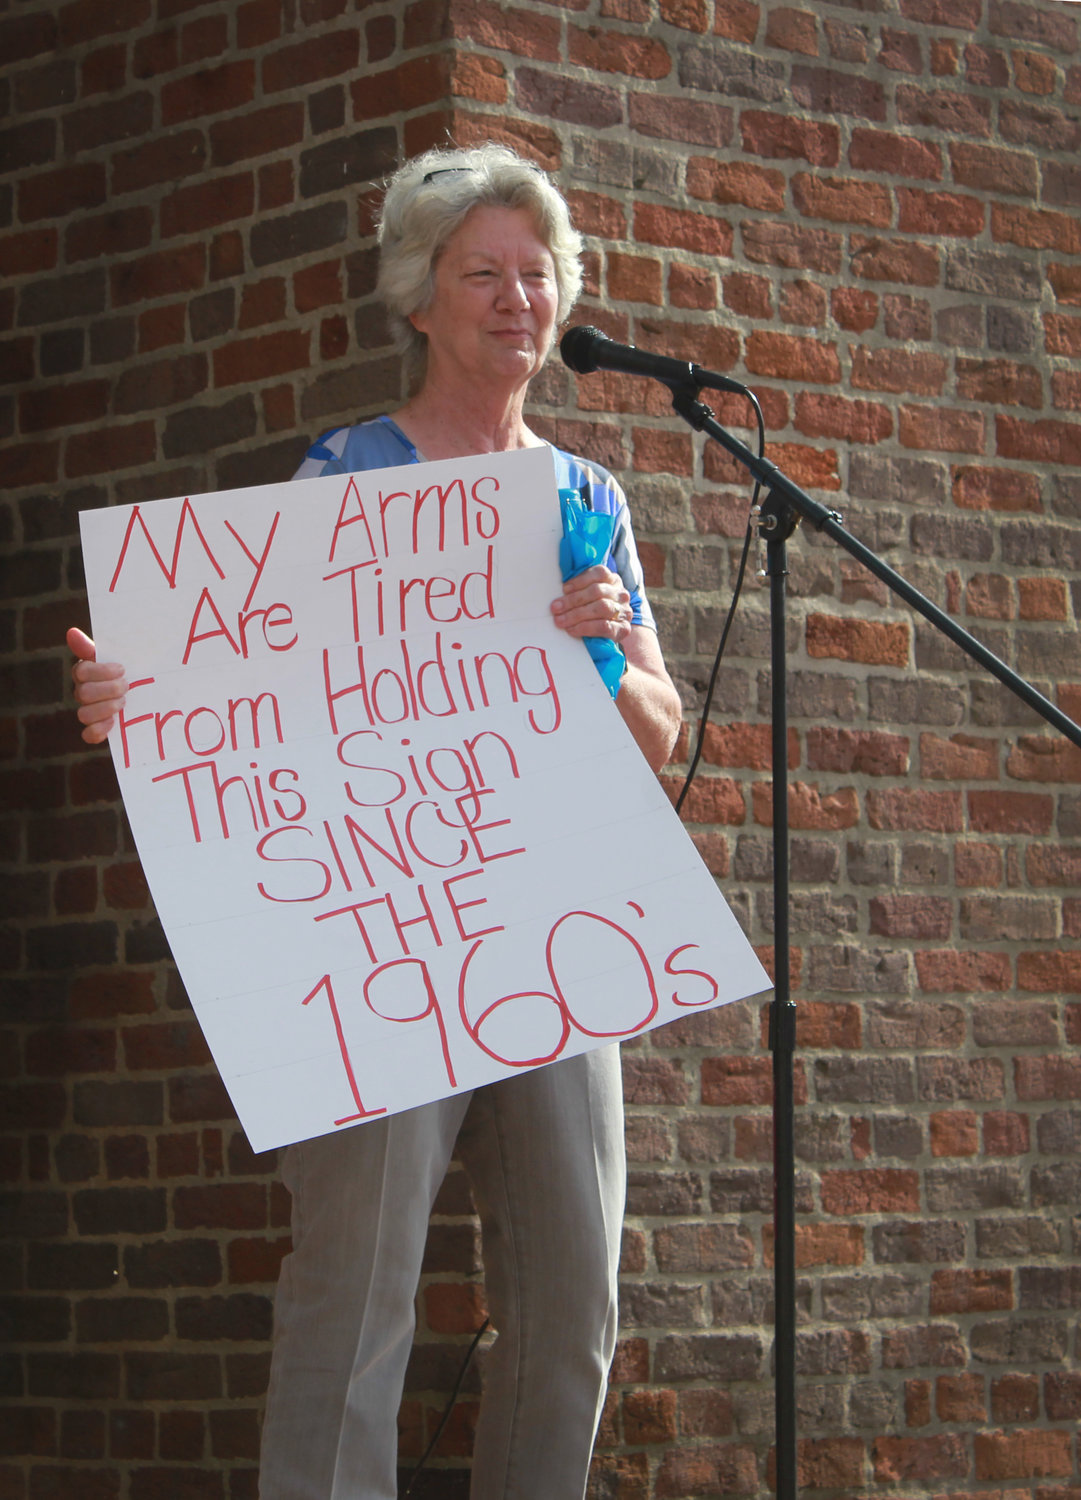 Pittsboro Mayor Cindy Perry holds up her sign as she speaks to the crowd during the abortion and women’s righs protest on Monday at the HIstoric Courthouse in Pittsboro. Perry spoke to how the overturning of Roe v. Wade will have a domino effect on all women’s rights.